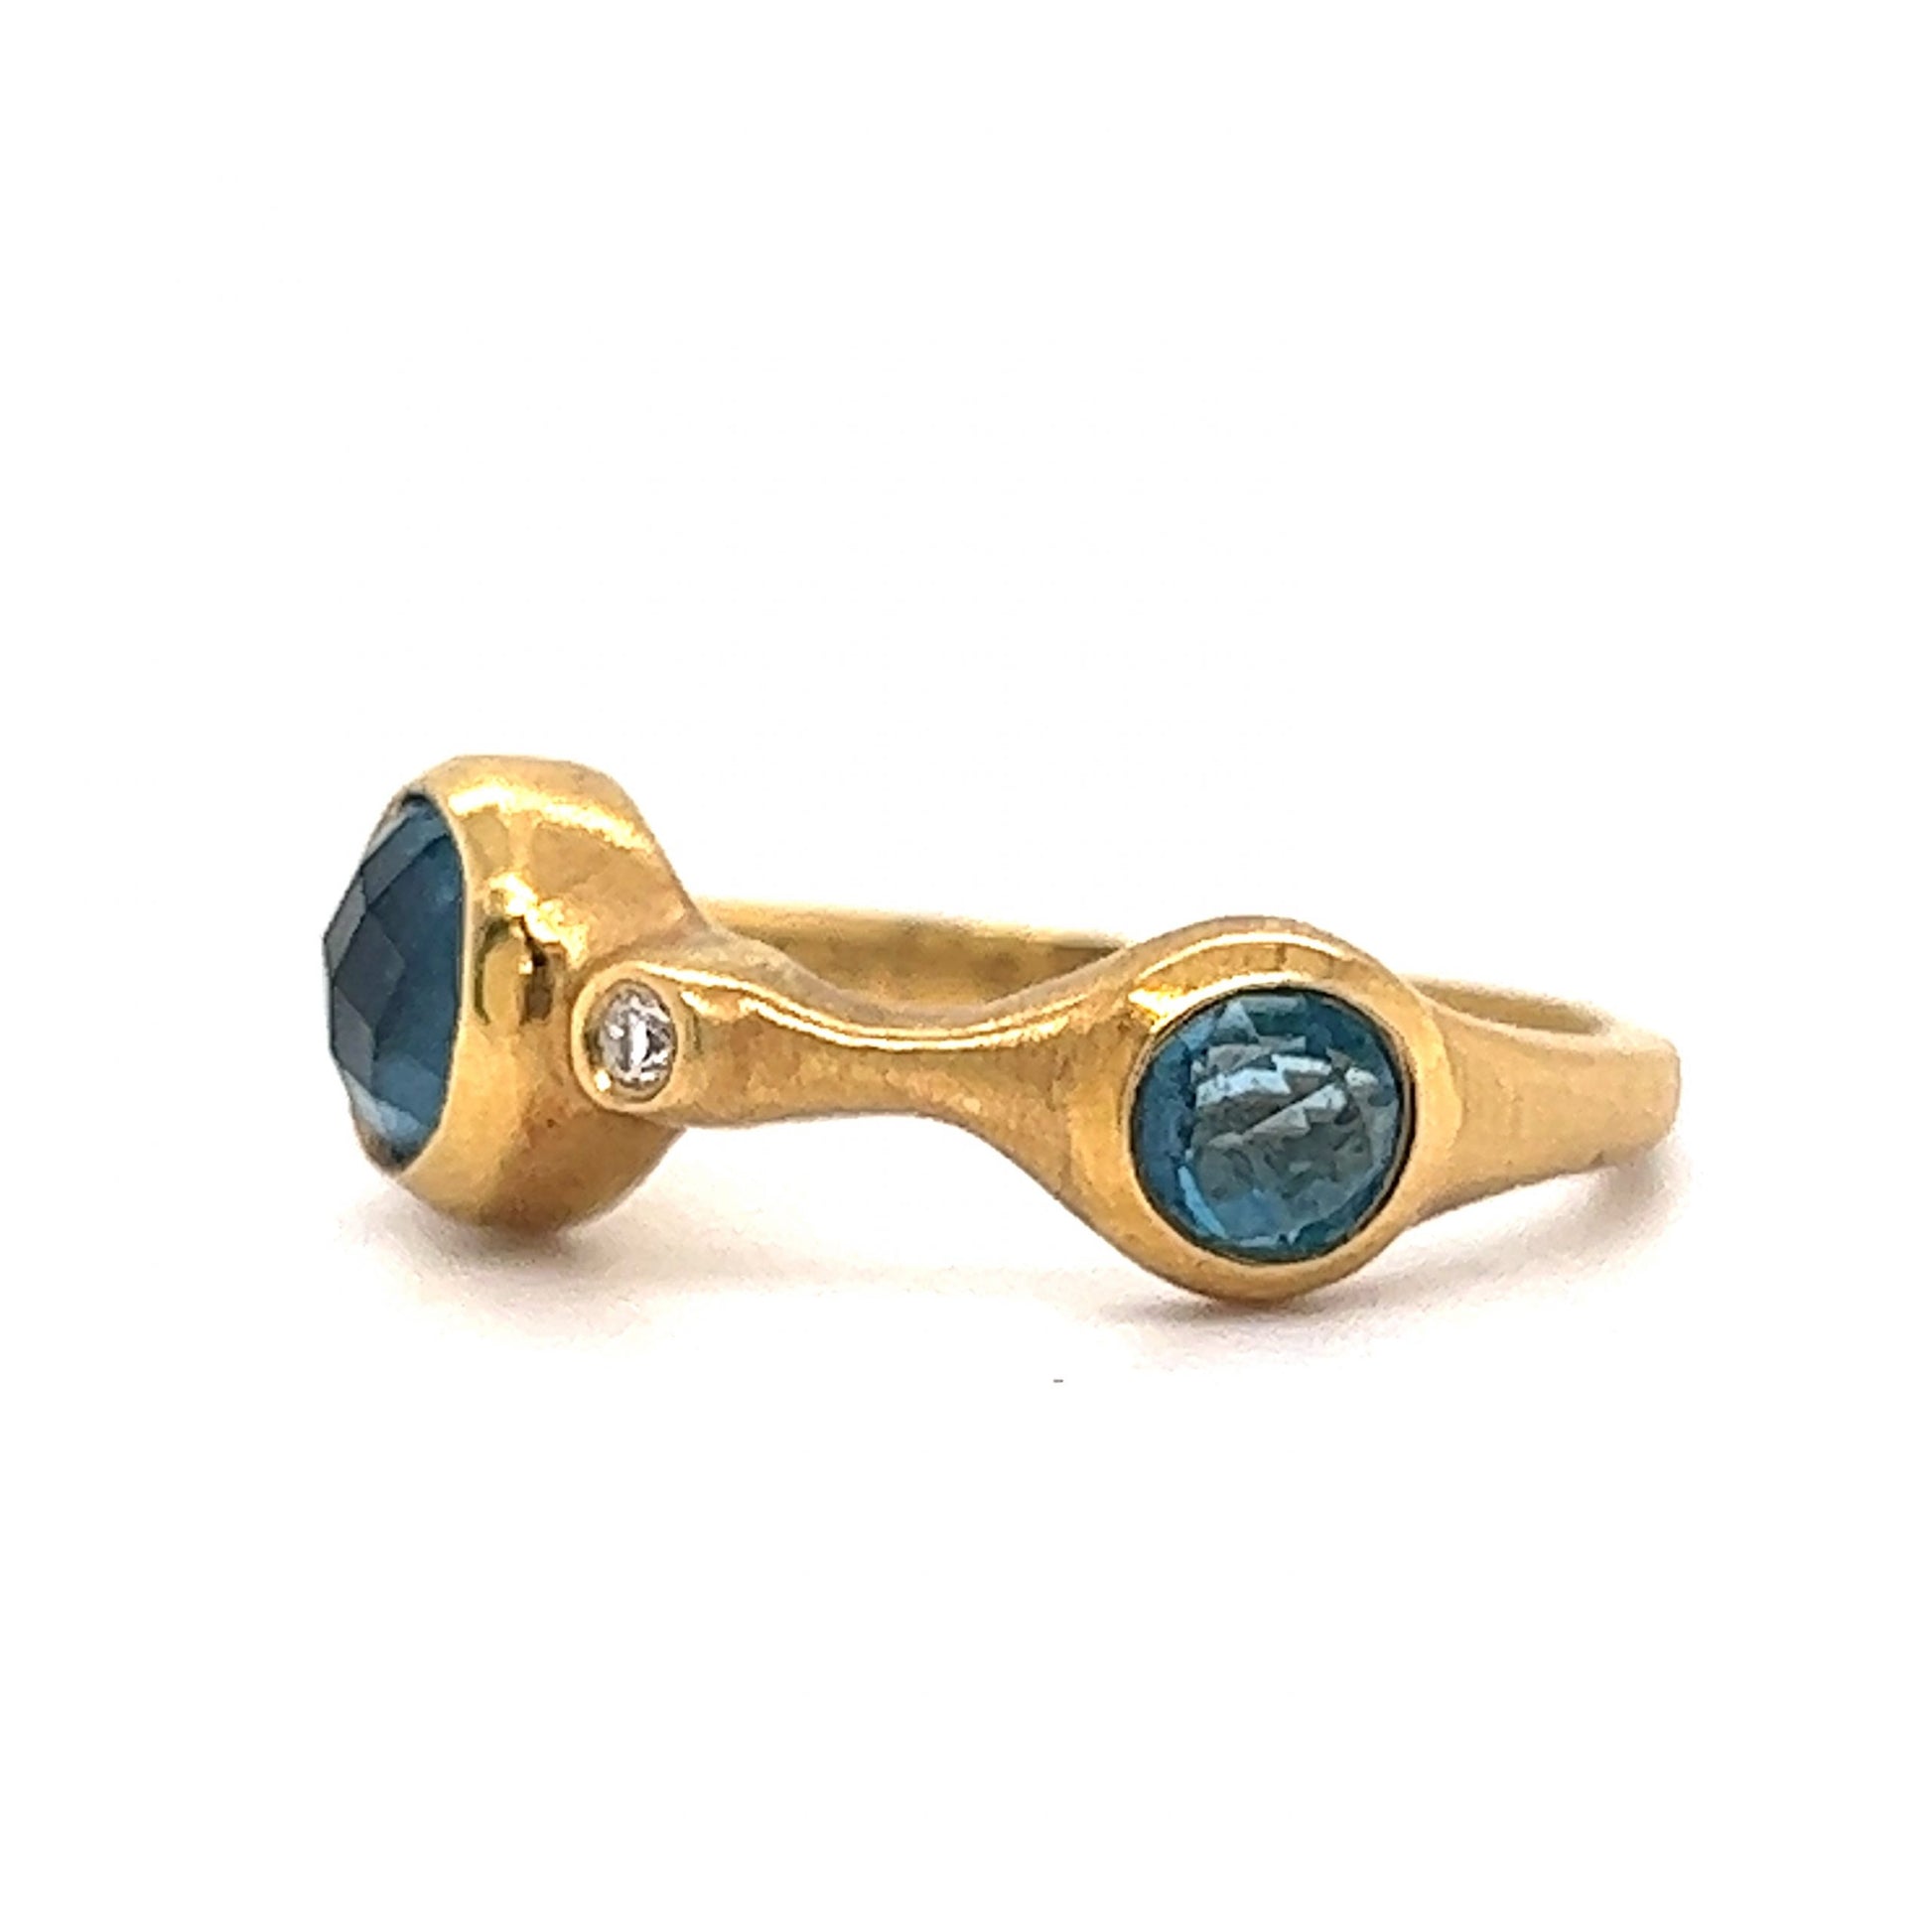 Carelle Blue Topaz & Diamond Stacking Ring in 18k Yellow Gold